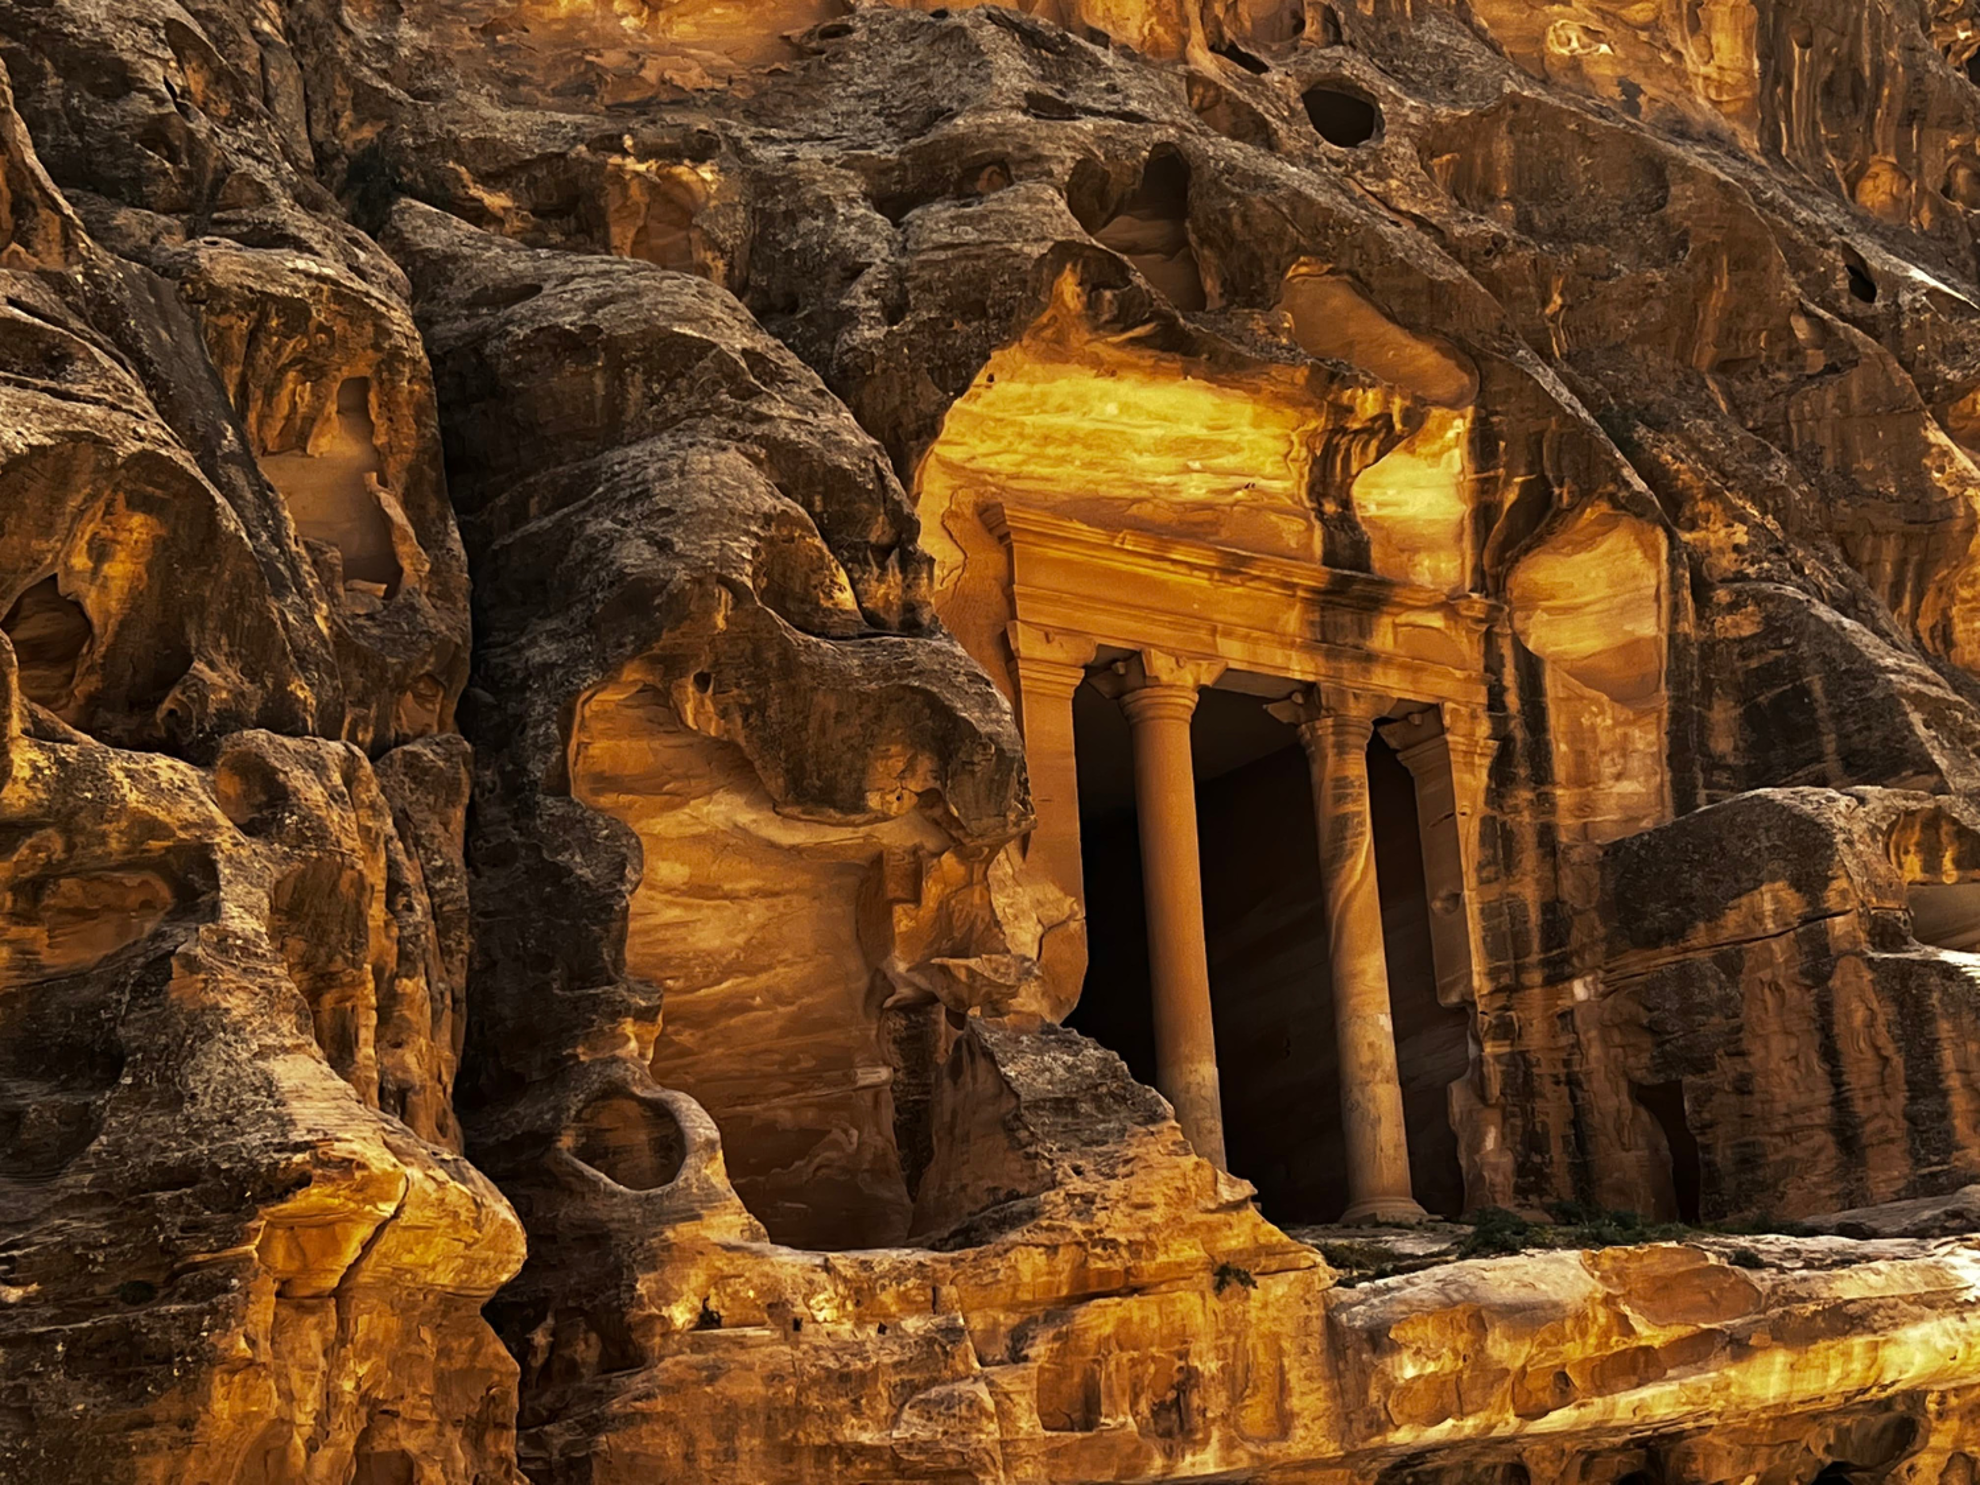 Picture of Discovering Jordan - Hiking and Culture